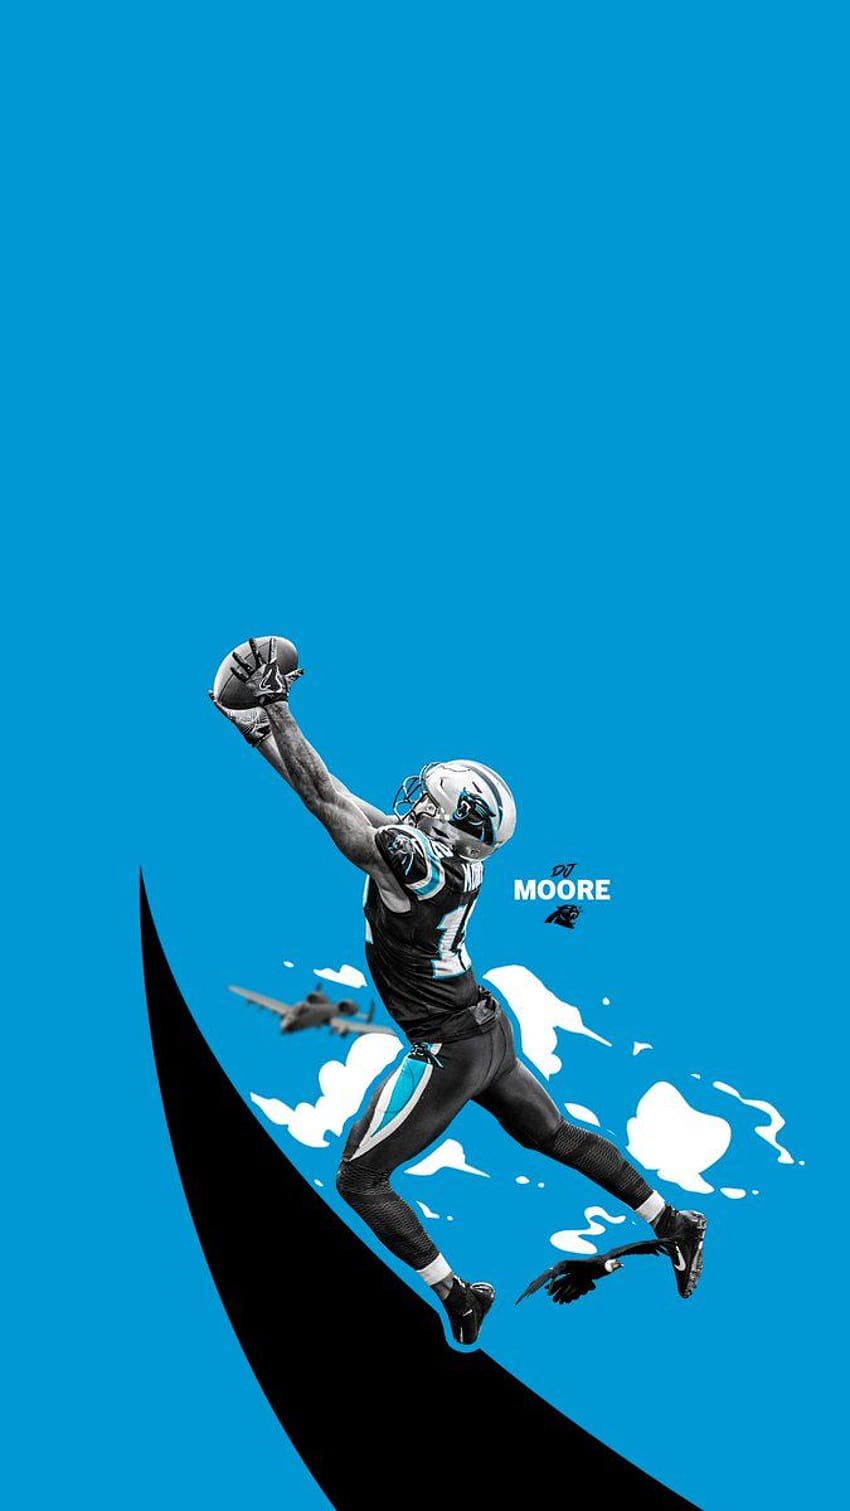 Carolina Panthers on Twitter Cool it now  httpstcoSToGnGsSzh   Twitter